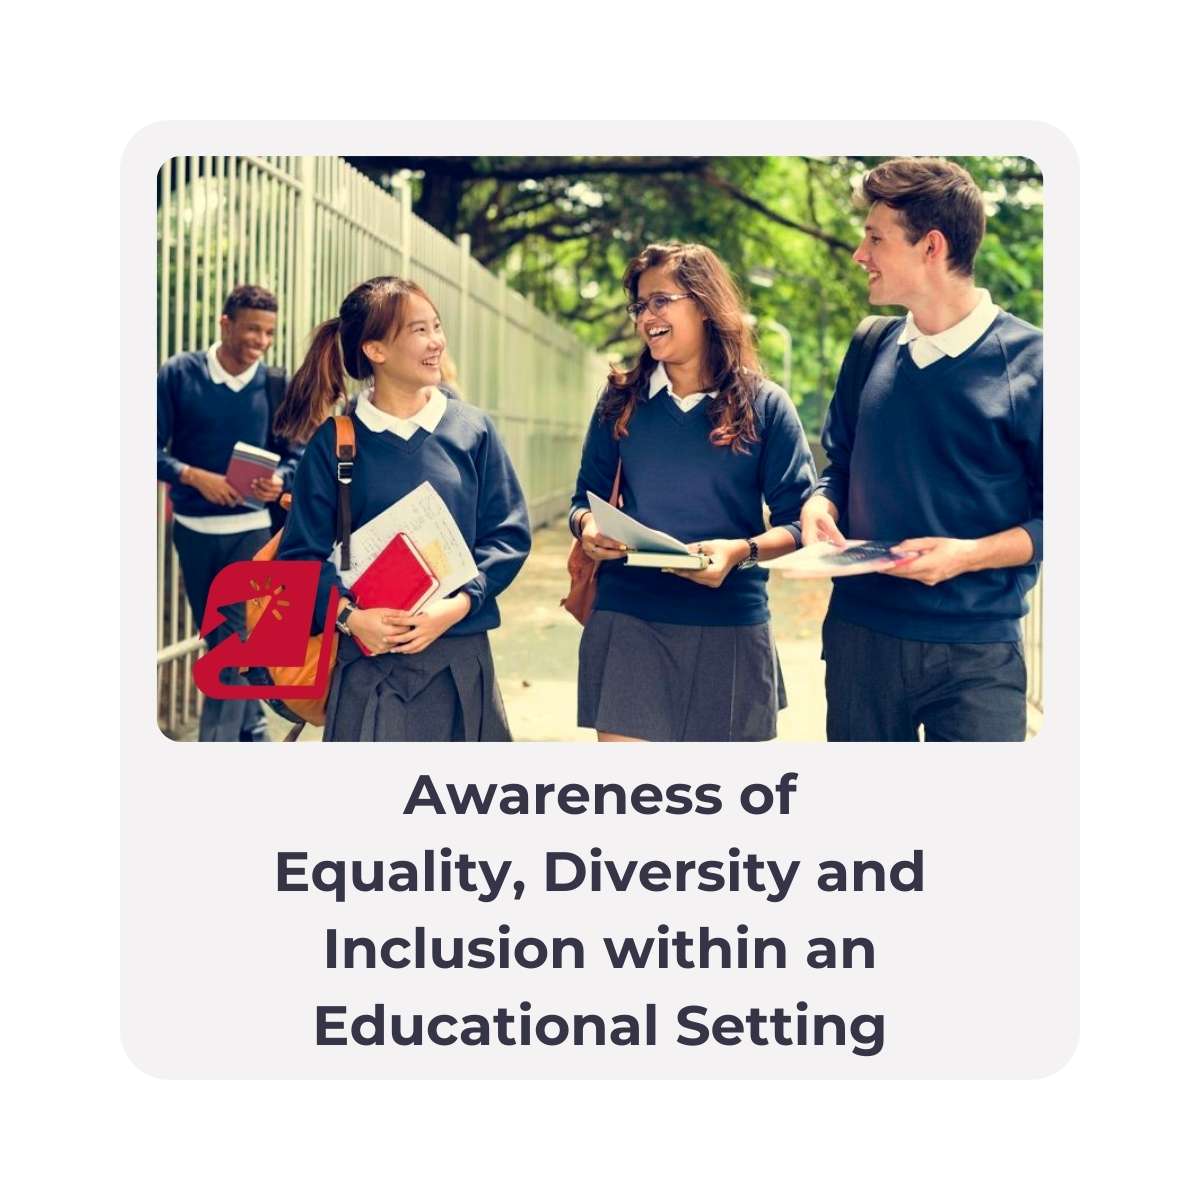 Awareness of Equality, Diversity and Inclusion within an Educational Setting